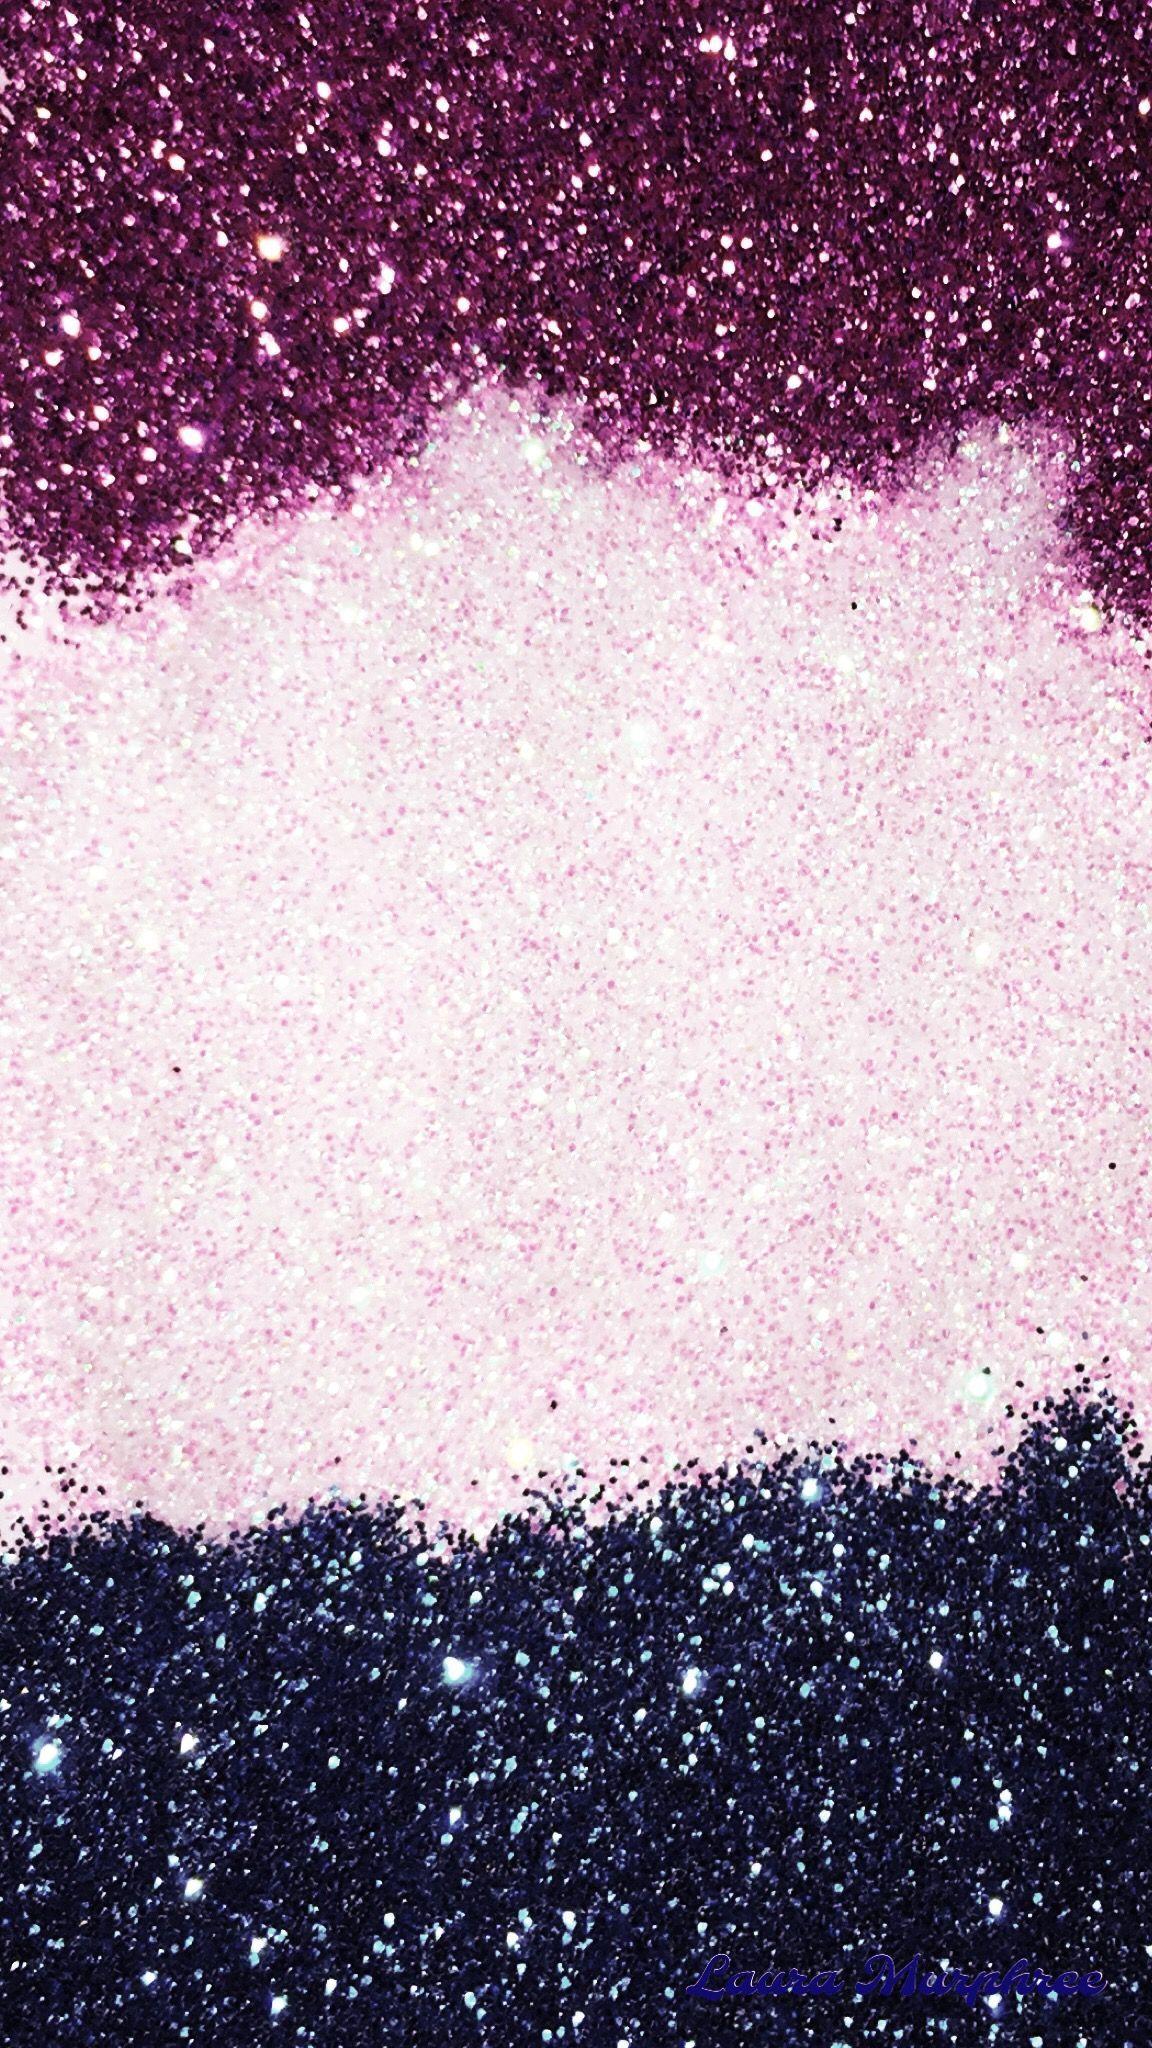 Pink Aesthetic Wallpaper for iPhone  47 Gorgeous  Cute Backgrounds